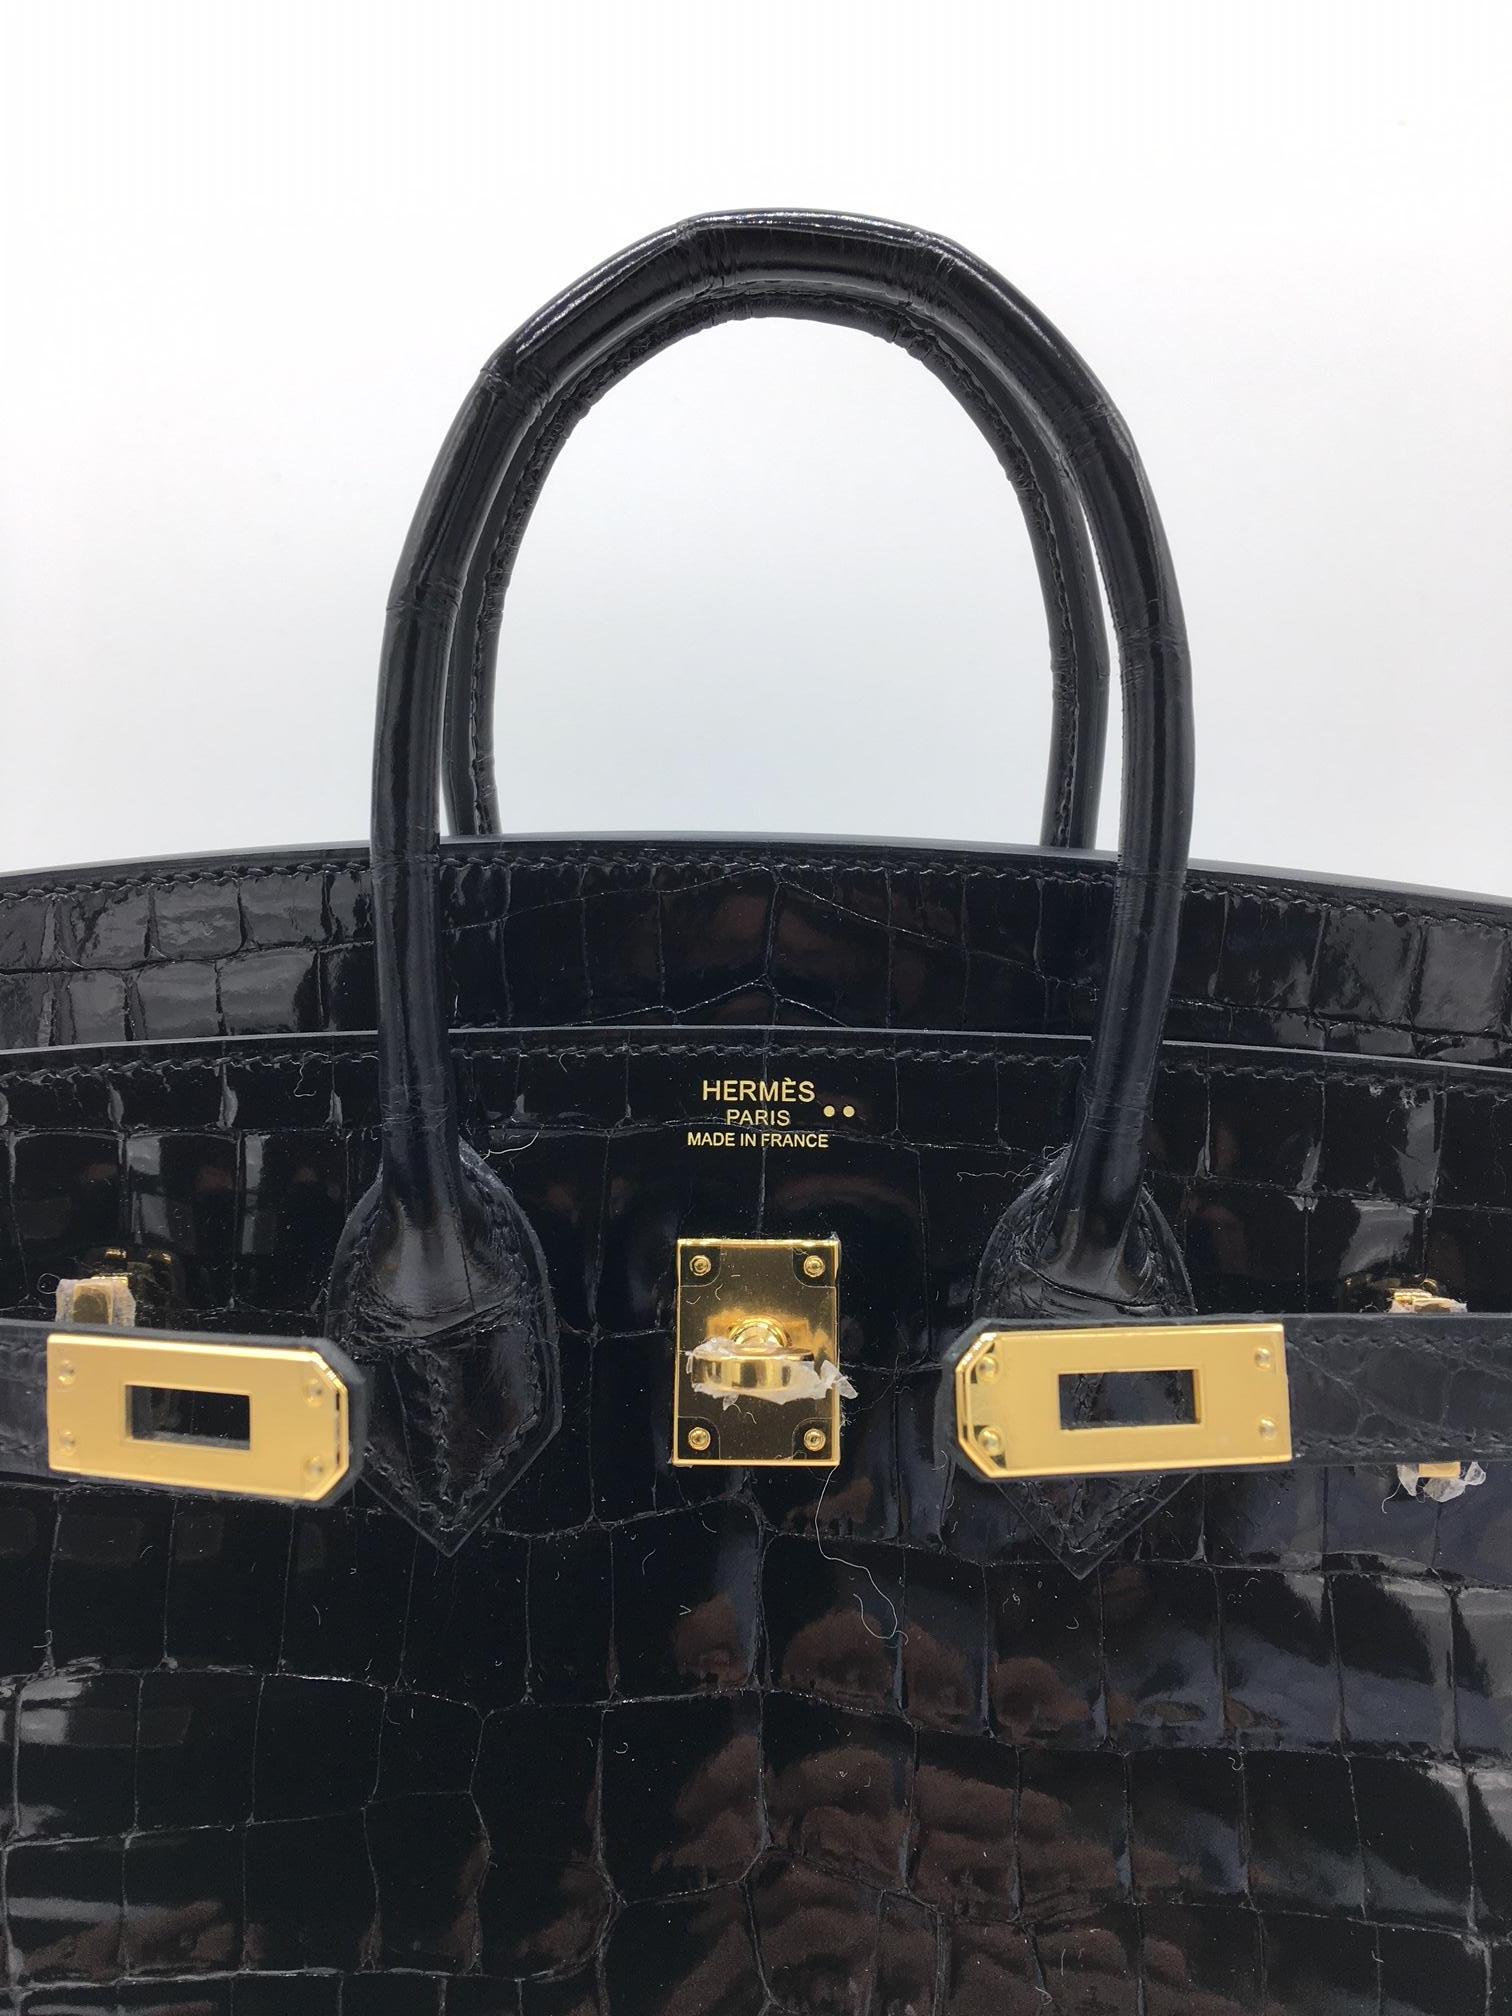 The 25cm Birkin is a hugely popular size and especially desirable in this classic combination of Black Shiny Nilocitus Crocodile with Gold Hardware. It’s such a beautiful bag and the perfect size for carrying everything you need for the daytime and